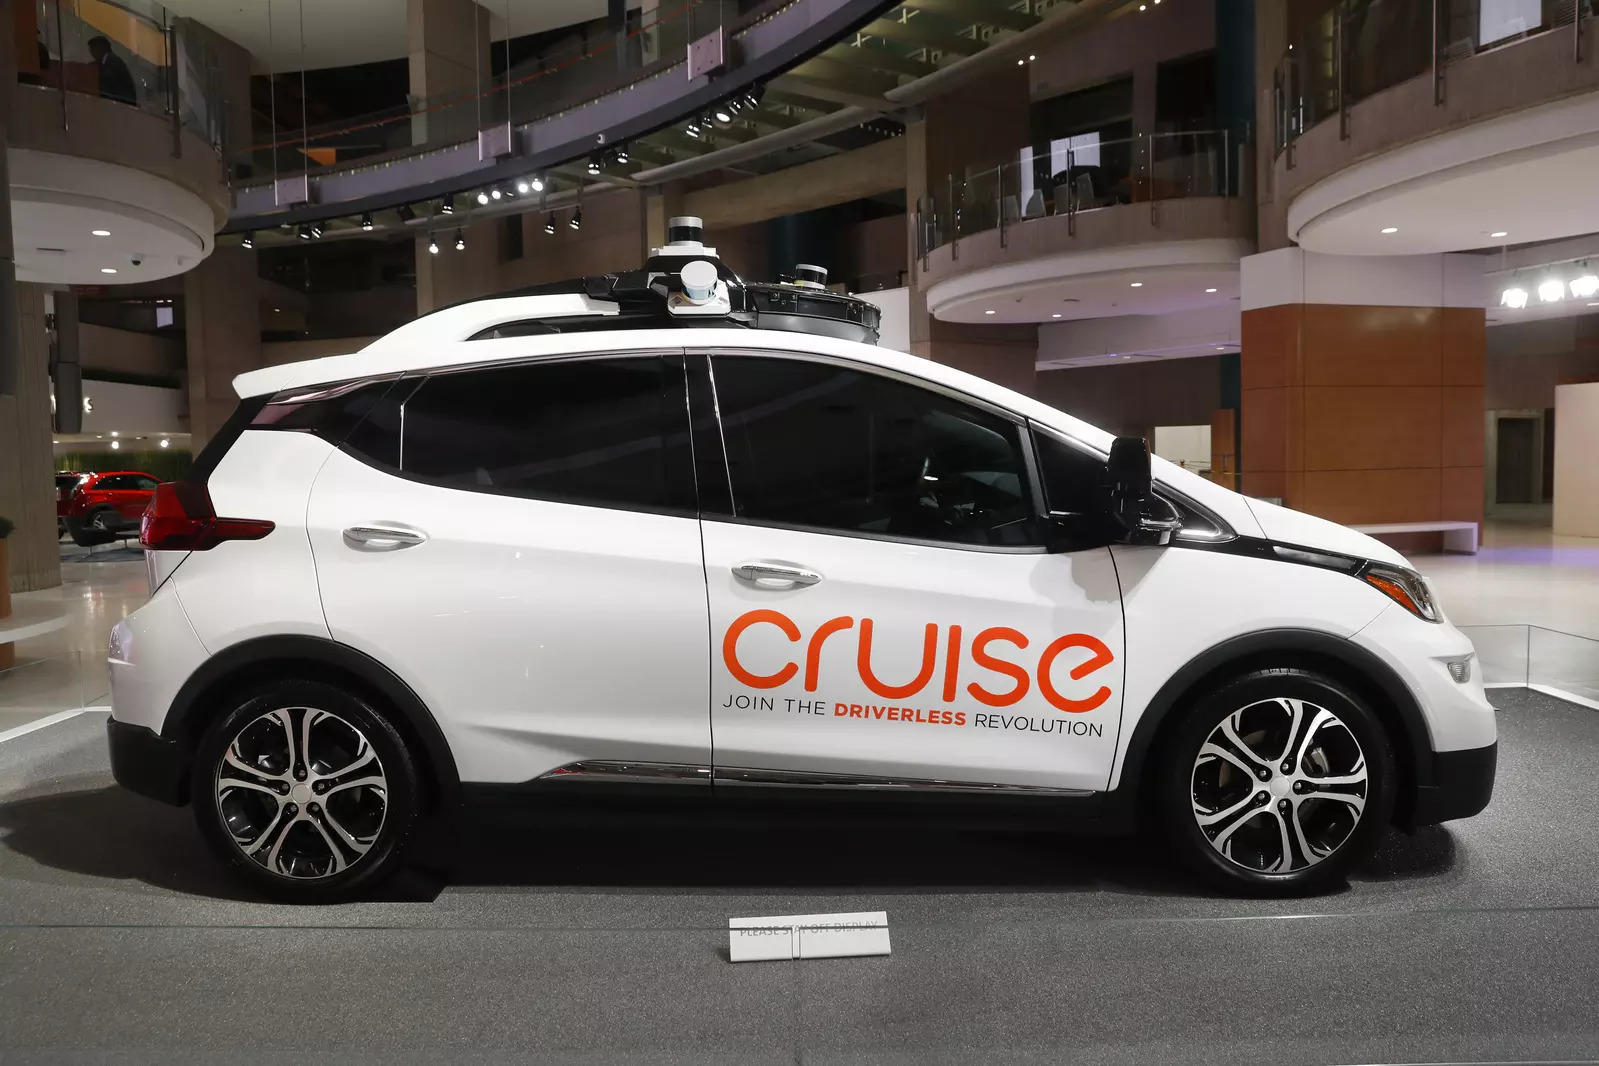  Cruise has obtained all the permits necessary for using the driverless cars for ride-hailing and delivery services in Phoenix, he said. 